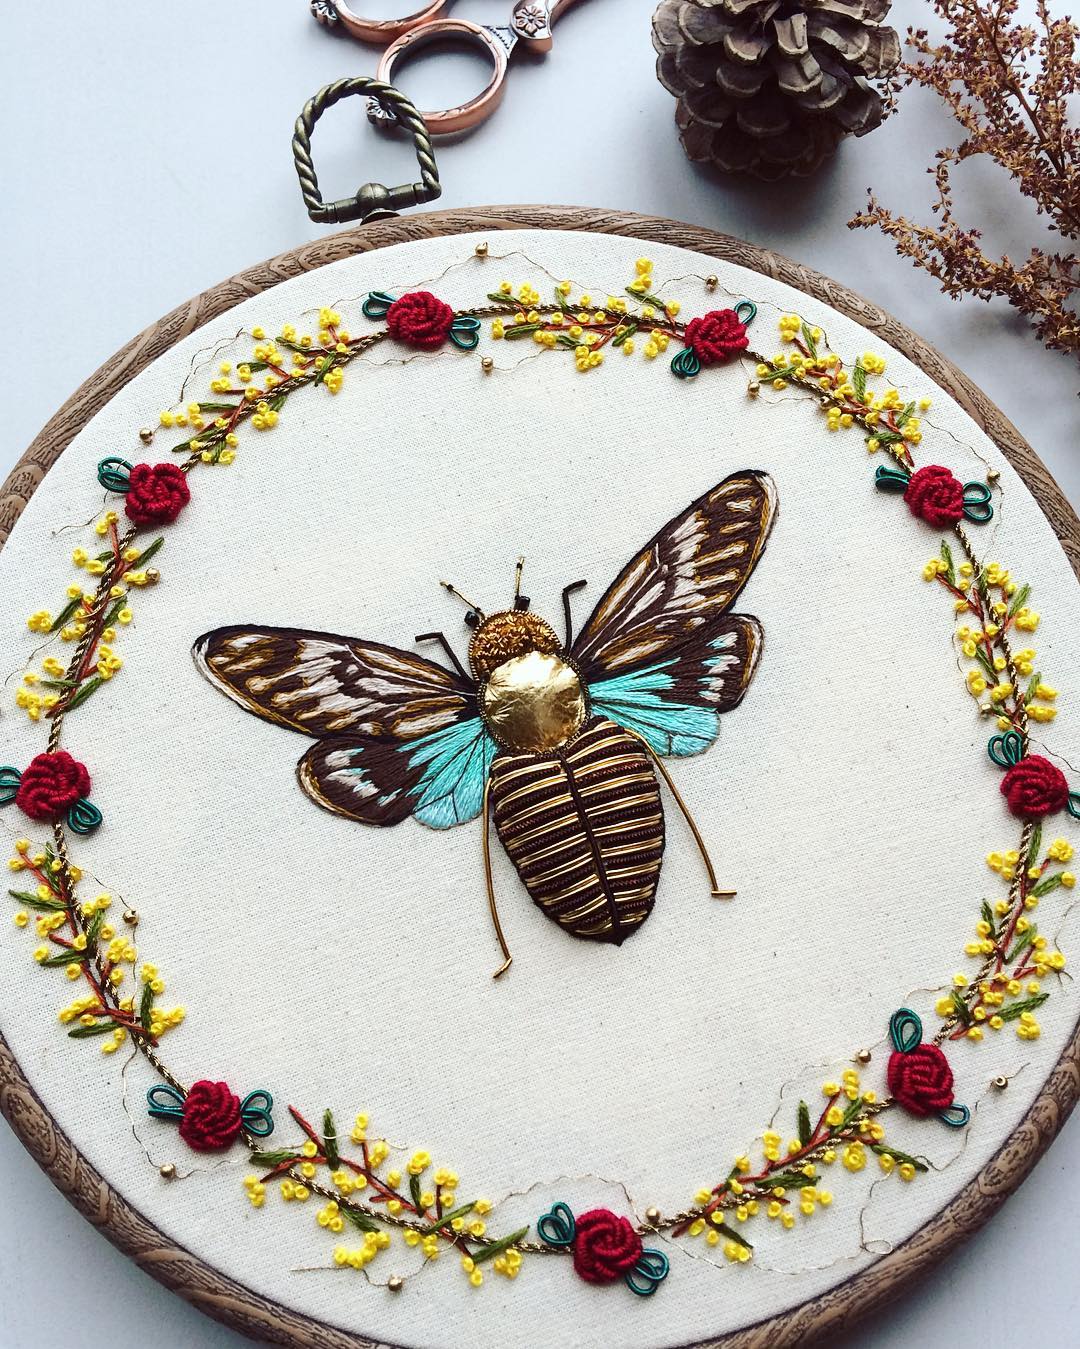 Beautiful Bird And Insect Embroideries Decorated With Metallic Beads By Humayrah Bint Altaf 5